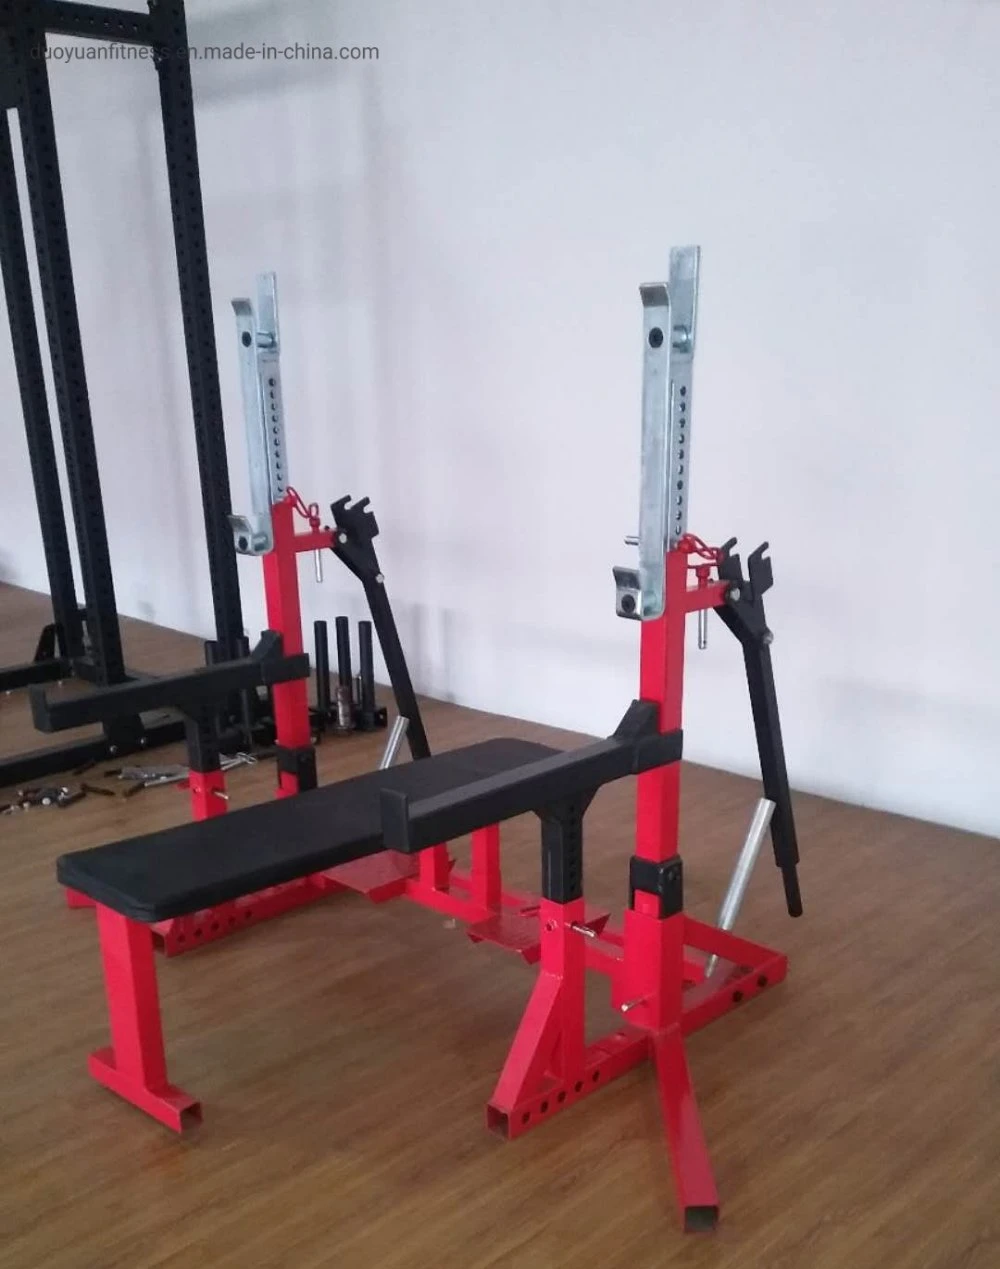 Body Exercise Workout Barbell Weight Lifting Gym Bench & Squat Rack Stand Weight Lifting Bench